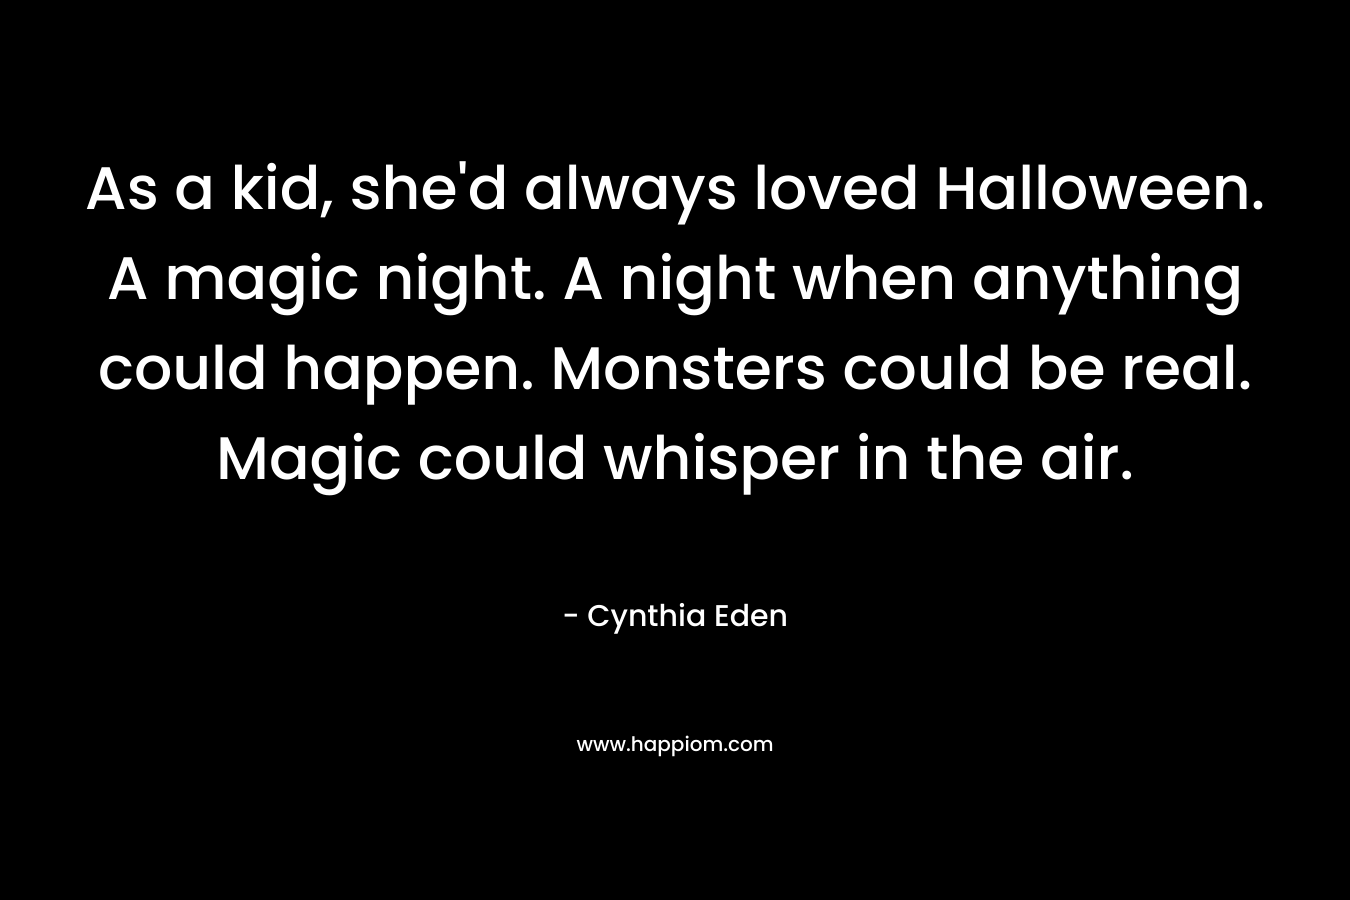 As a kid, she'd always loved Halloween. A magic night. A night when anything could happen. Monsters could be real. Magic could whisper in the air.